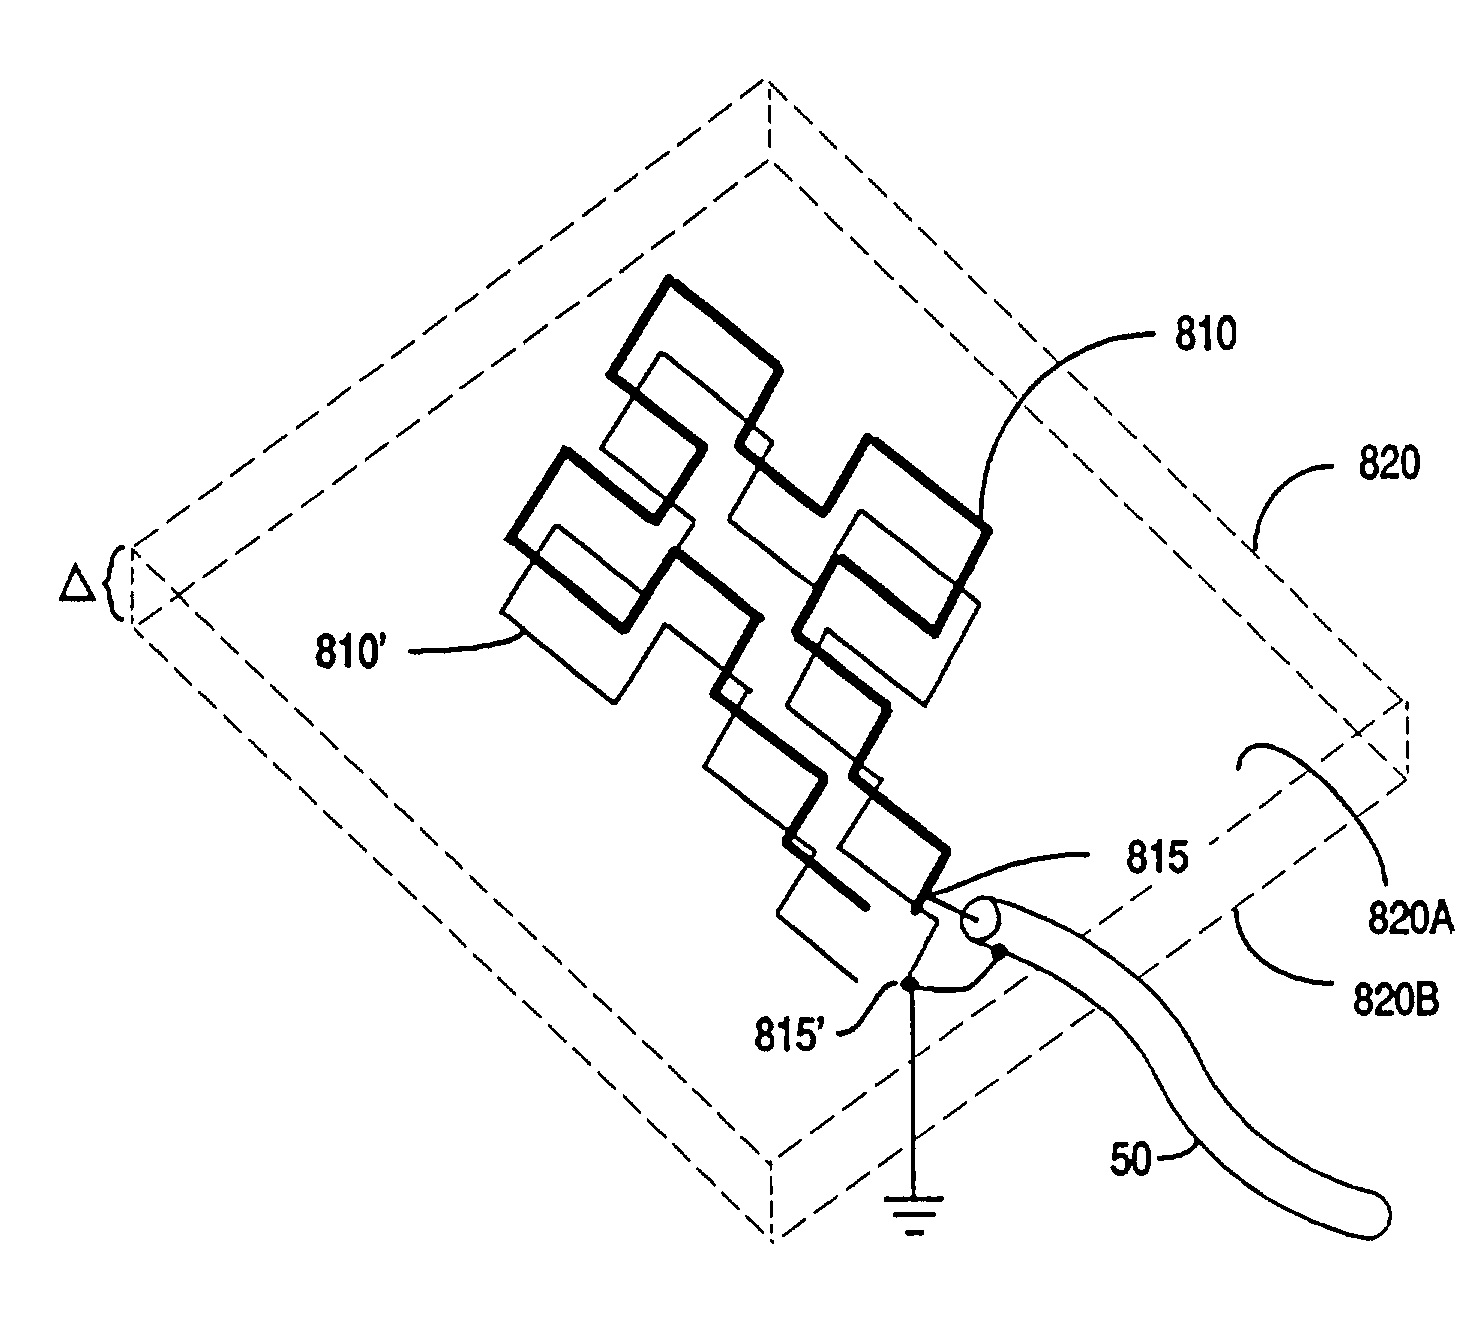 Fractal antenna ground counterpoise, ground planes, and loading elements and microstrip patch antennas with fractal structure